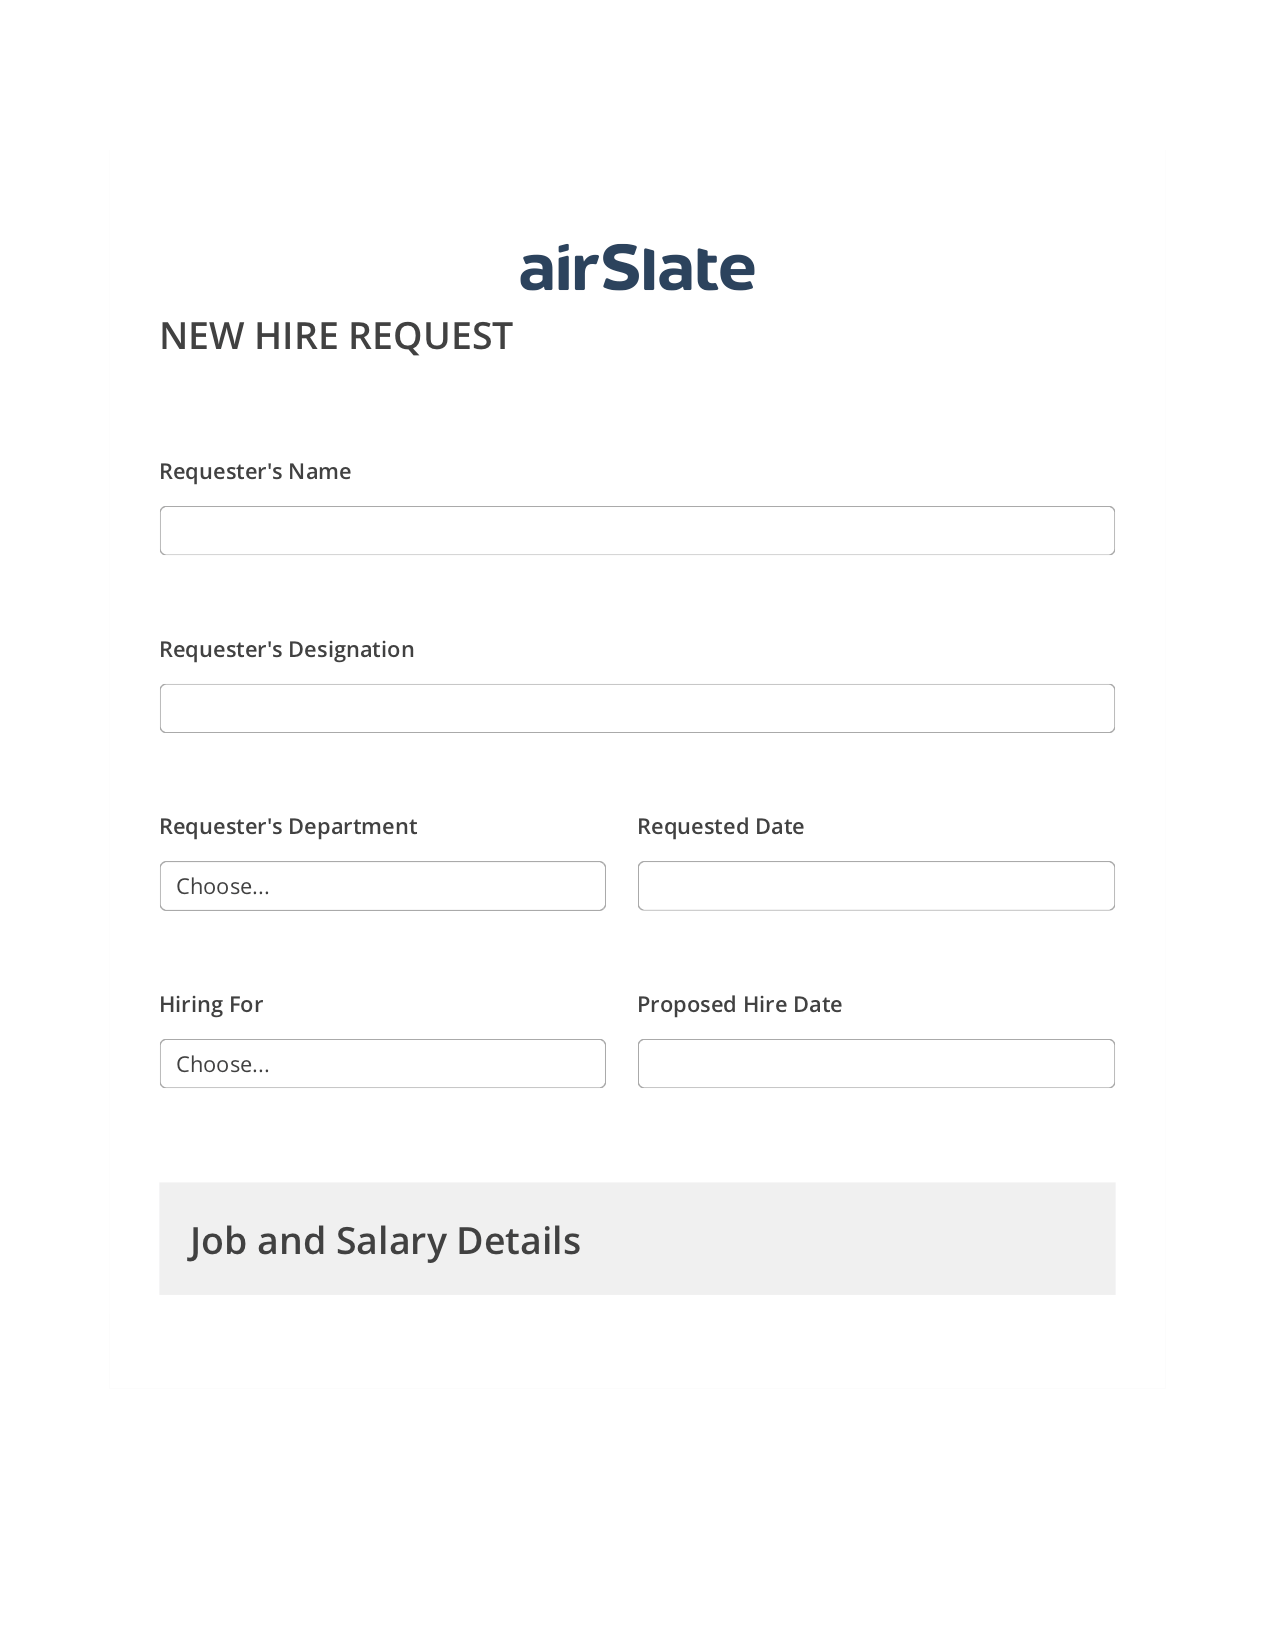 Hiring Request Workflow Pre-fill from Excel Spreadsheet Bot, Remove Tags From Slate Bot, Slack Two-Way Binding Bot